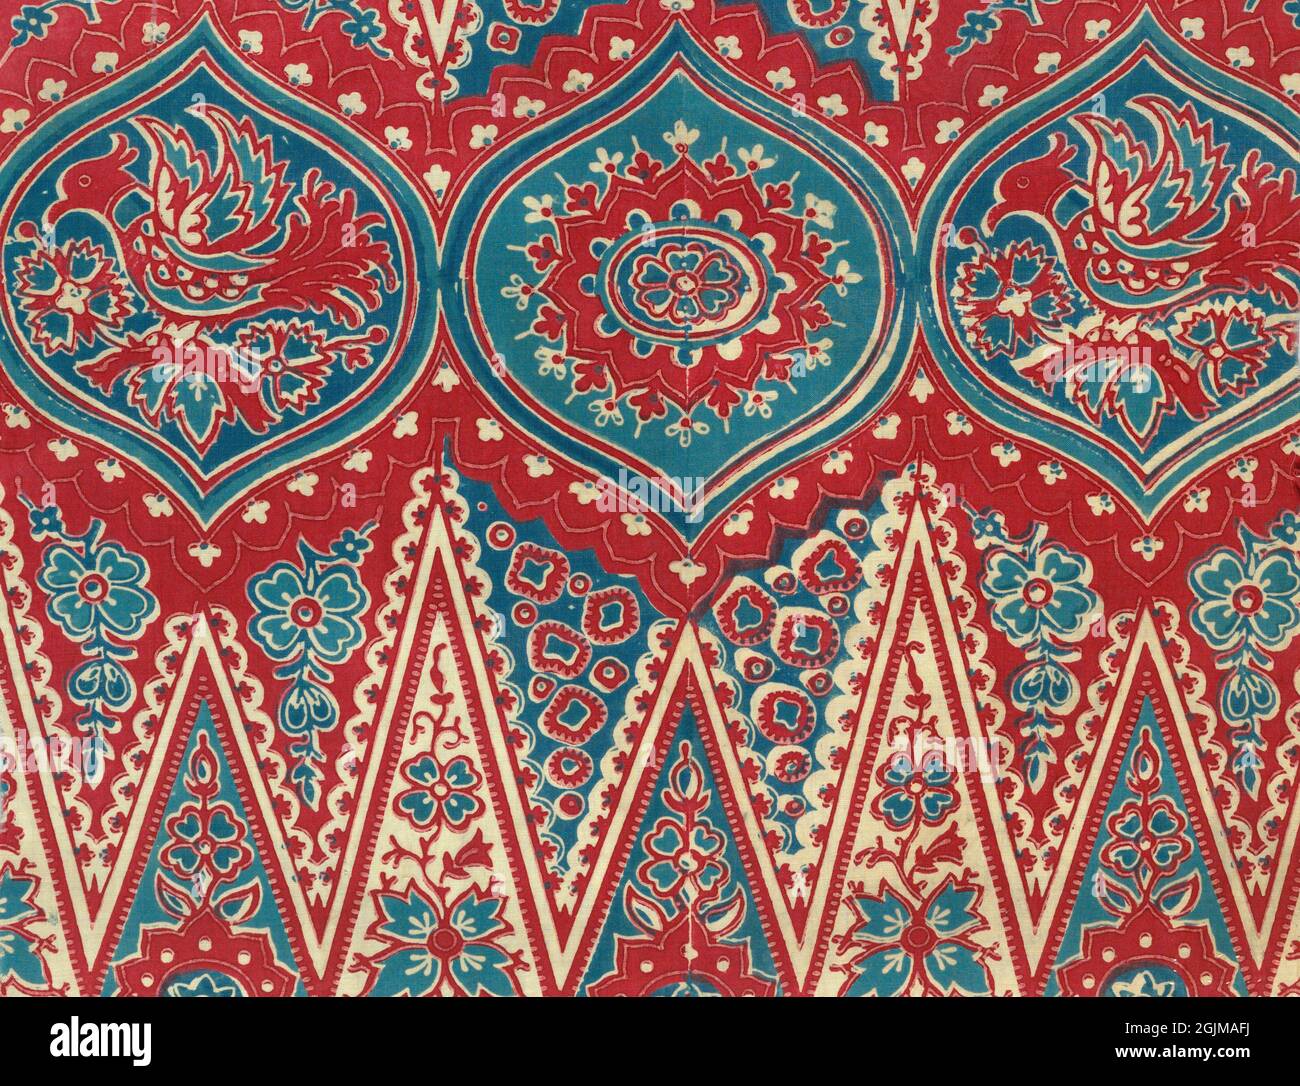 Indonesian red and blue batik cotton textile. Row of three ogival medallions: middle one with rosette, outer two with crested bird and flowers as well as remnants of deep toothed zigzag border below. Indonesia Stock Photo